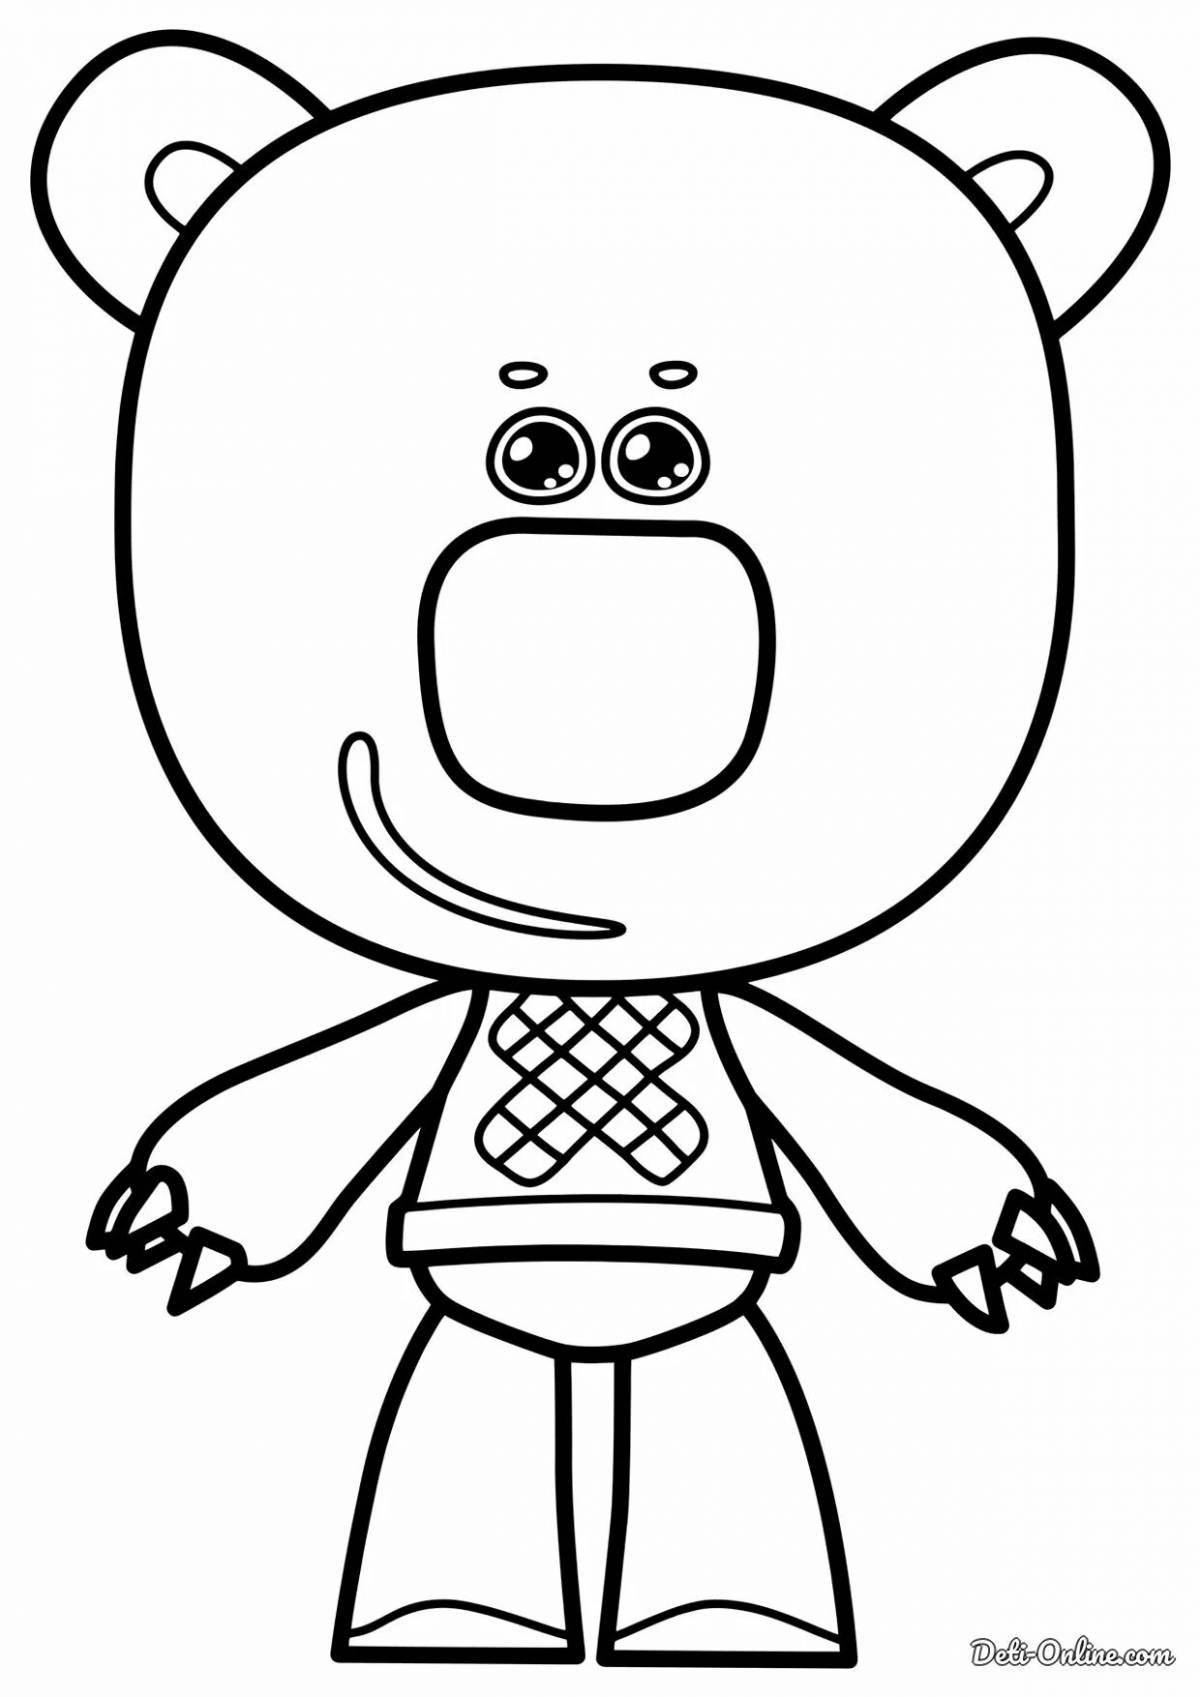 Charming mole coloring page from mimimishka